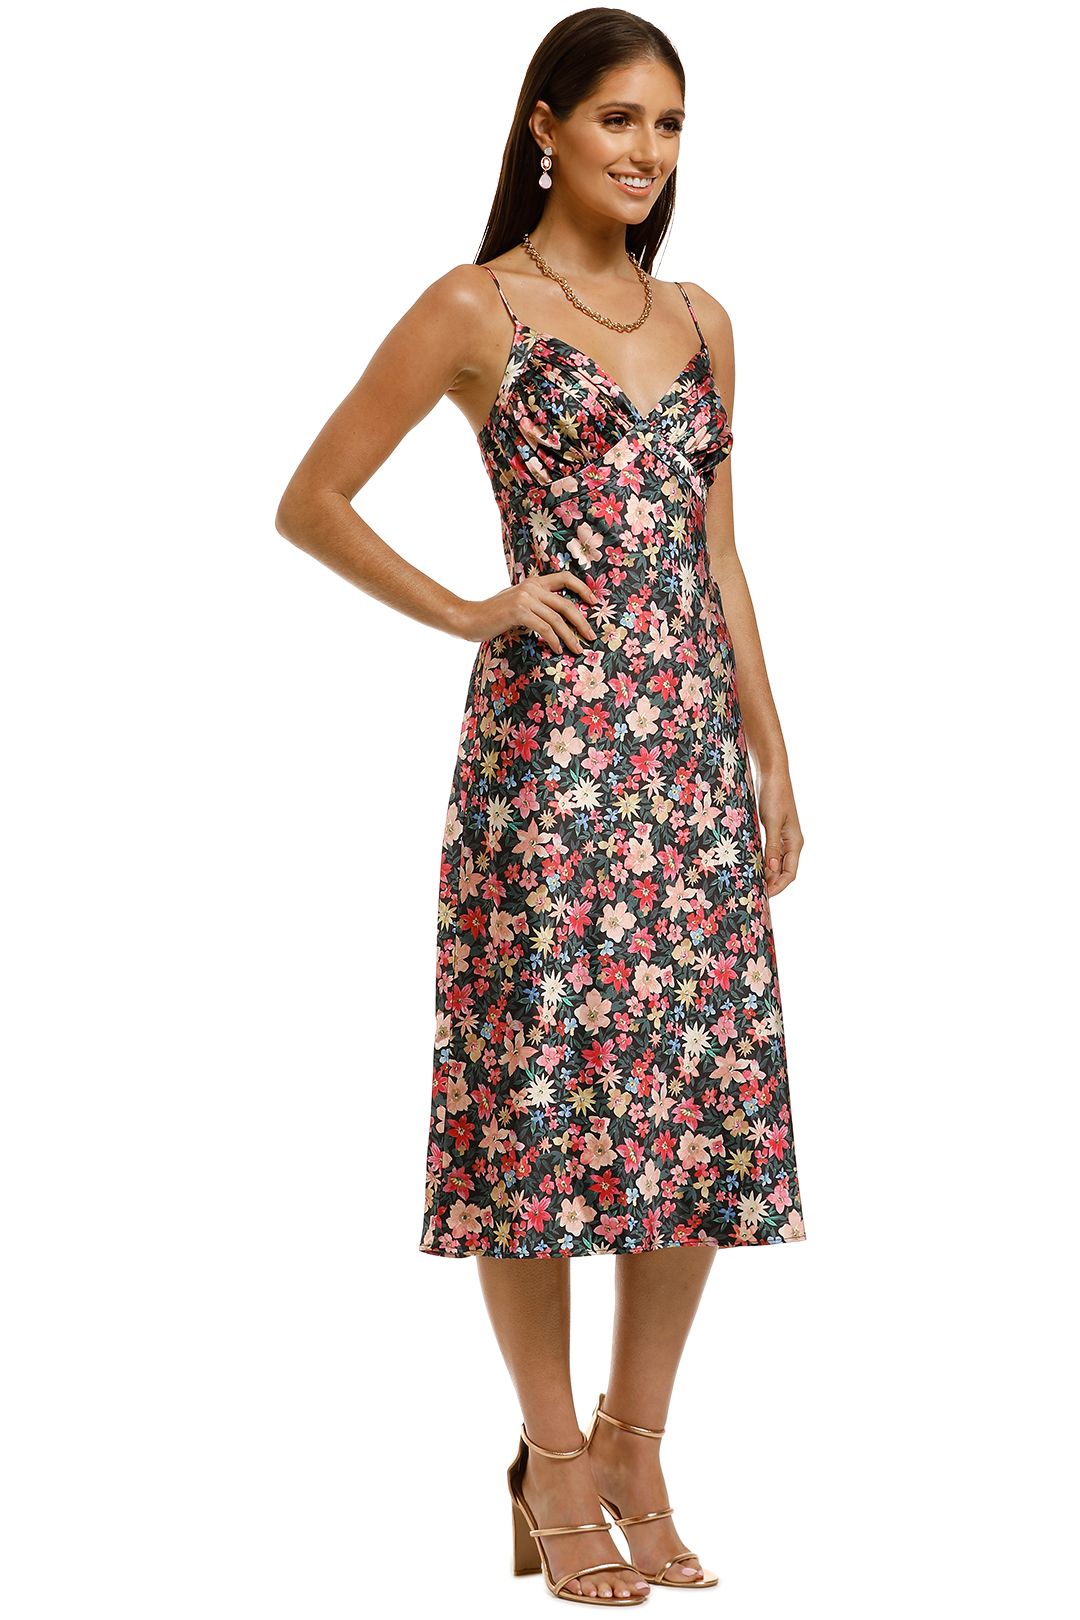 CMEO-Collective-Time-Flew-SS-Dress-Black-Garden-Floral-Side